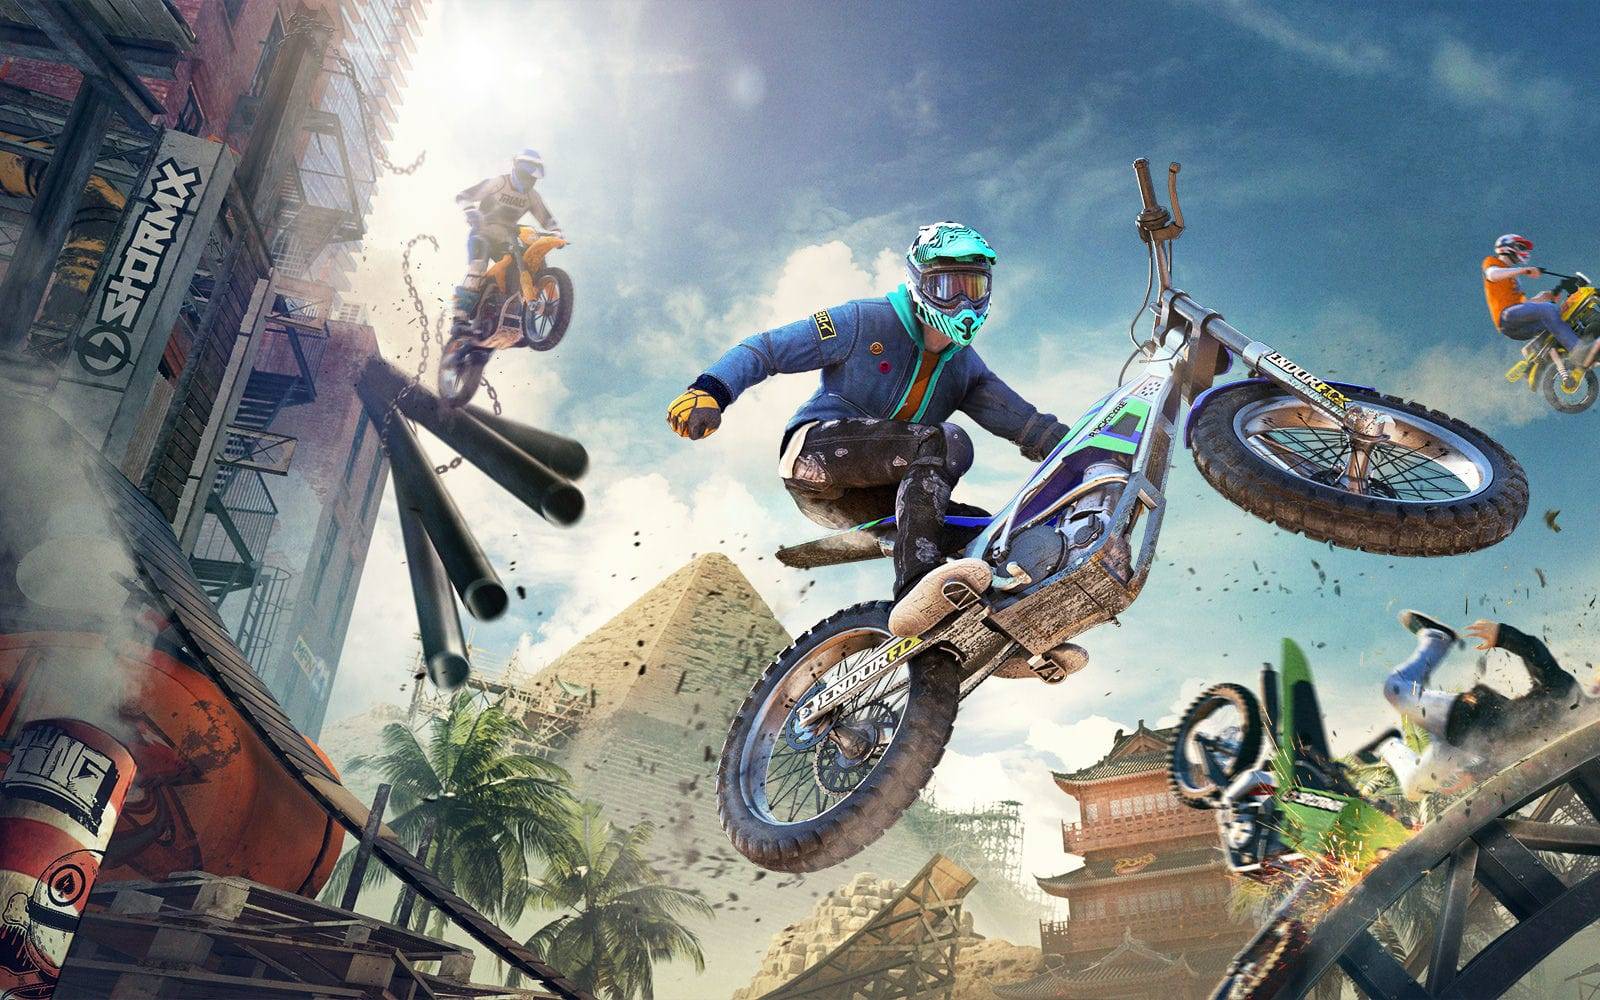 Try Trials Rising for free next weekend